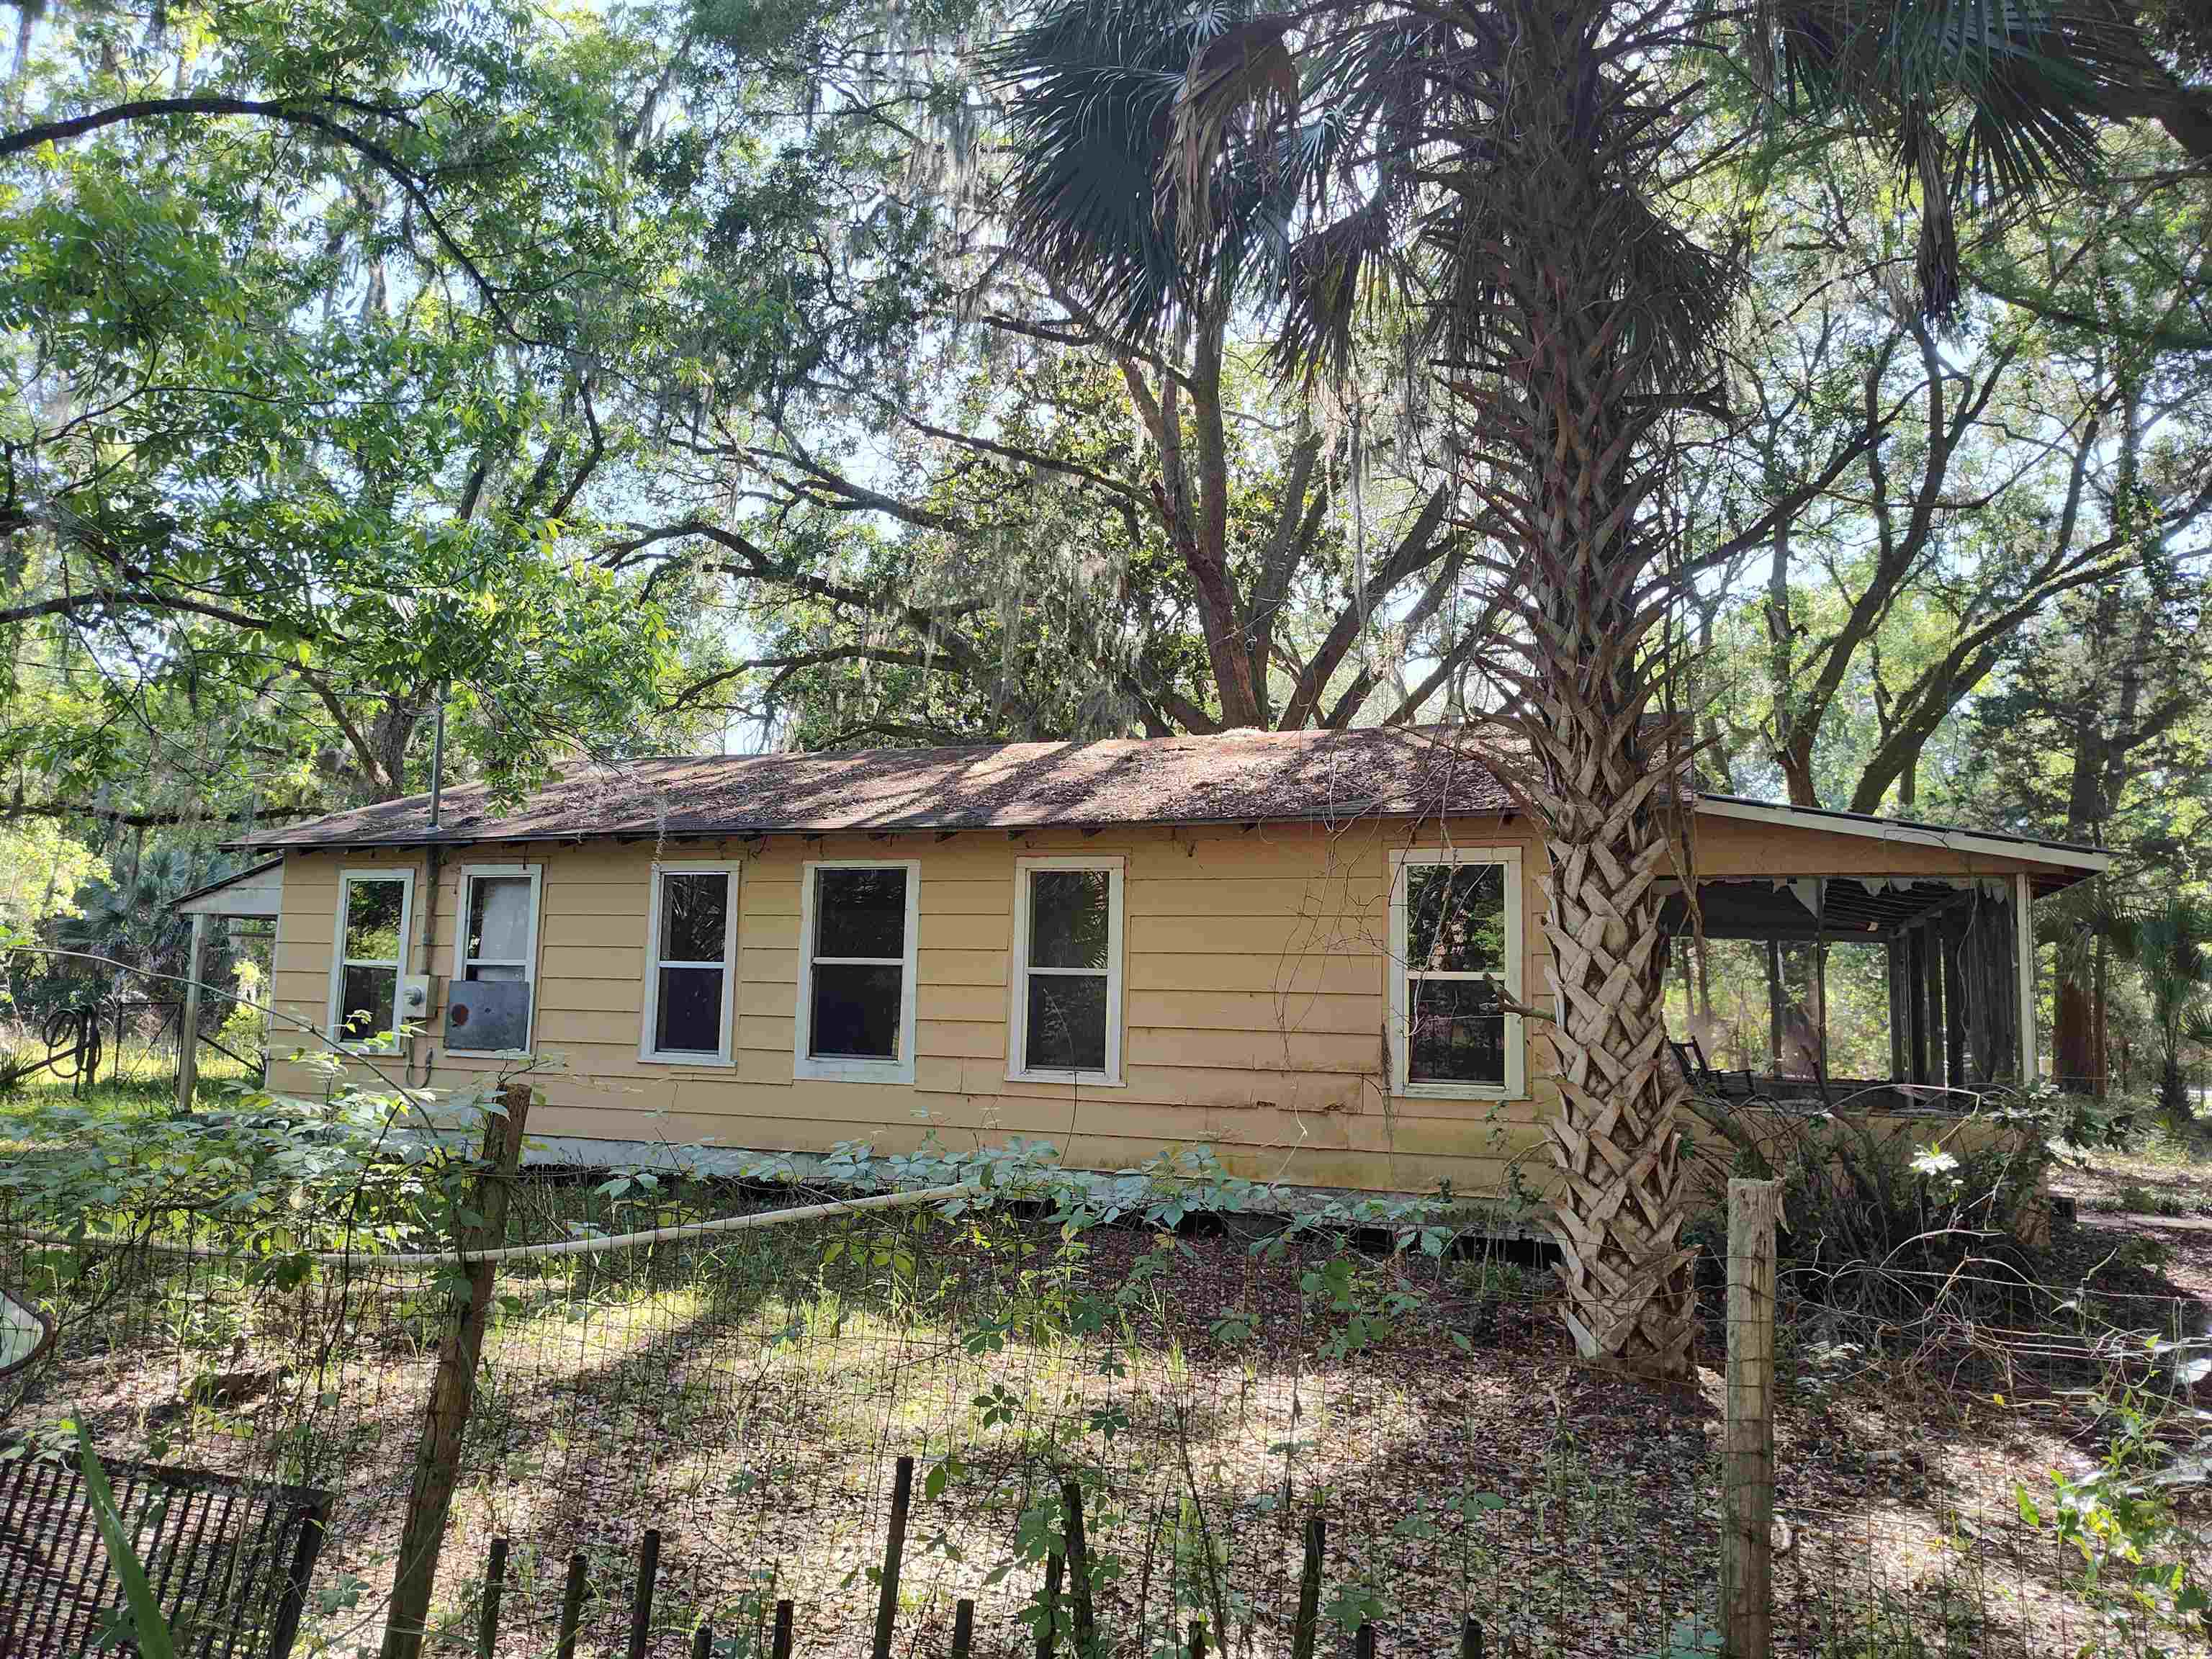 1618 Golf Course Road,PERRY,Florida 32347,3 Bedrooms Bedrooms,1 BathroomBathrooms,Detached single family,1618 Golf Course Road,358235